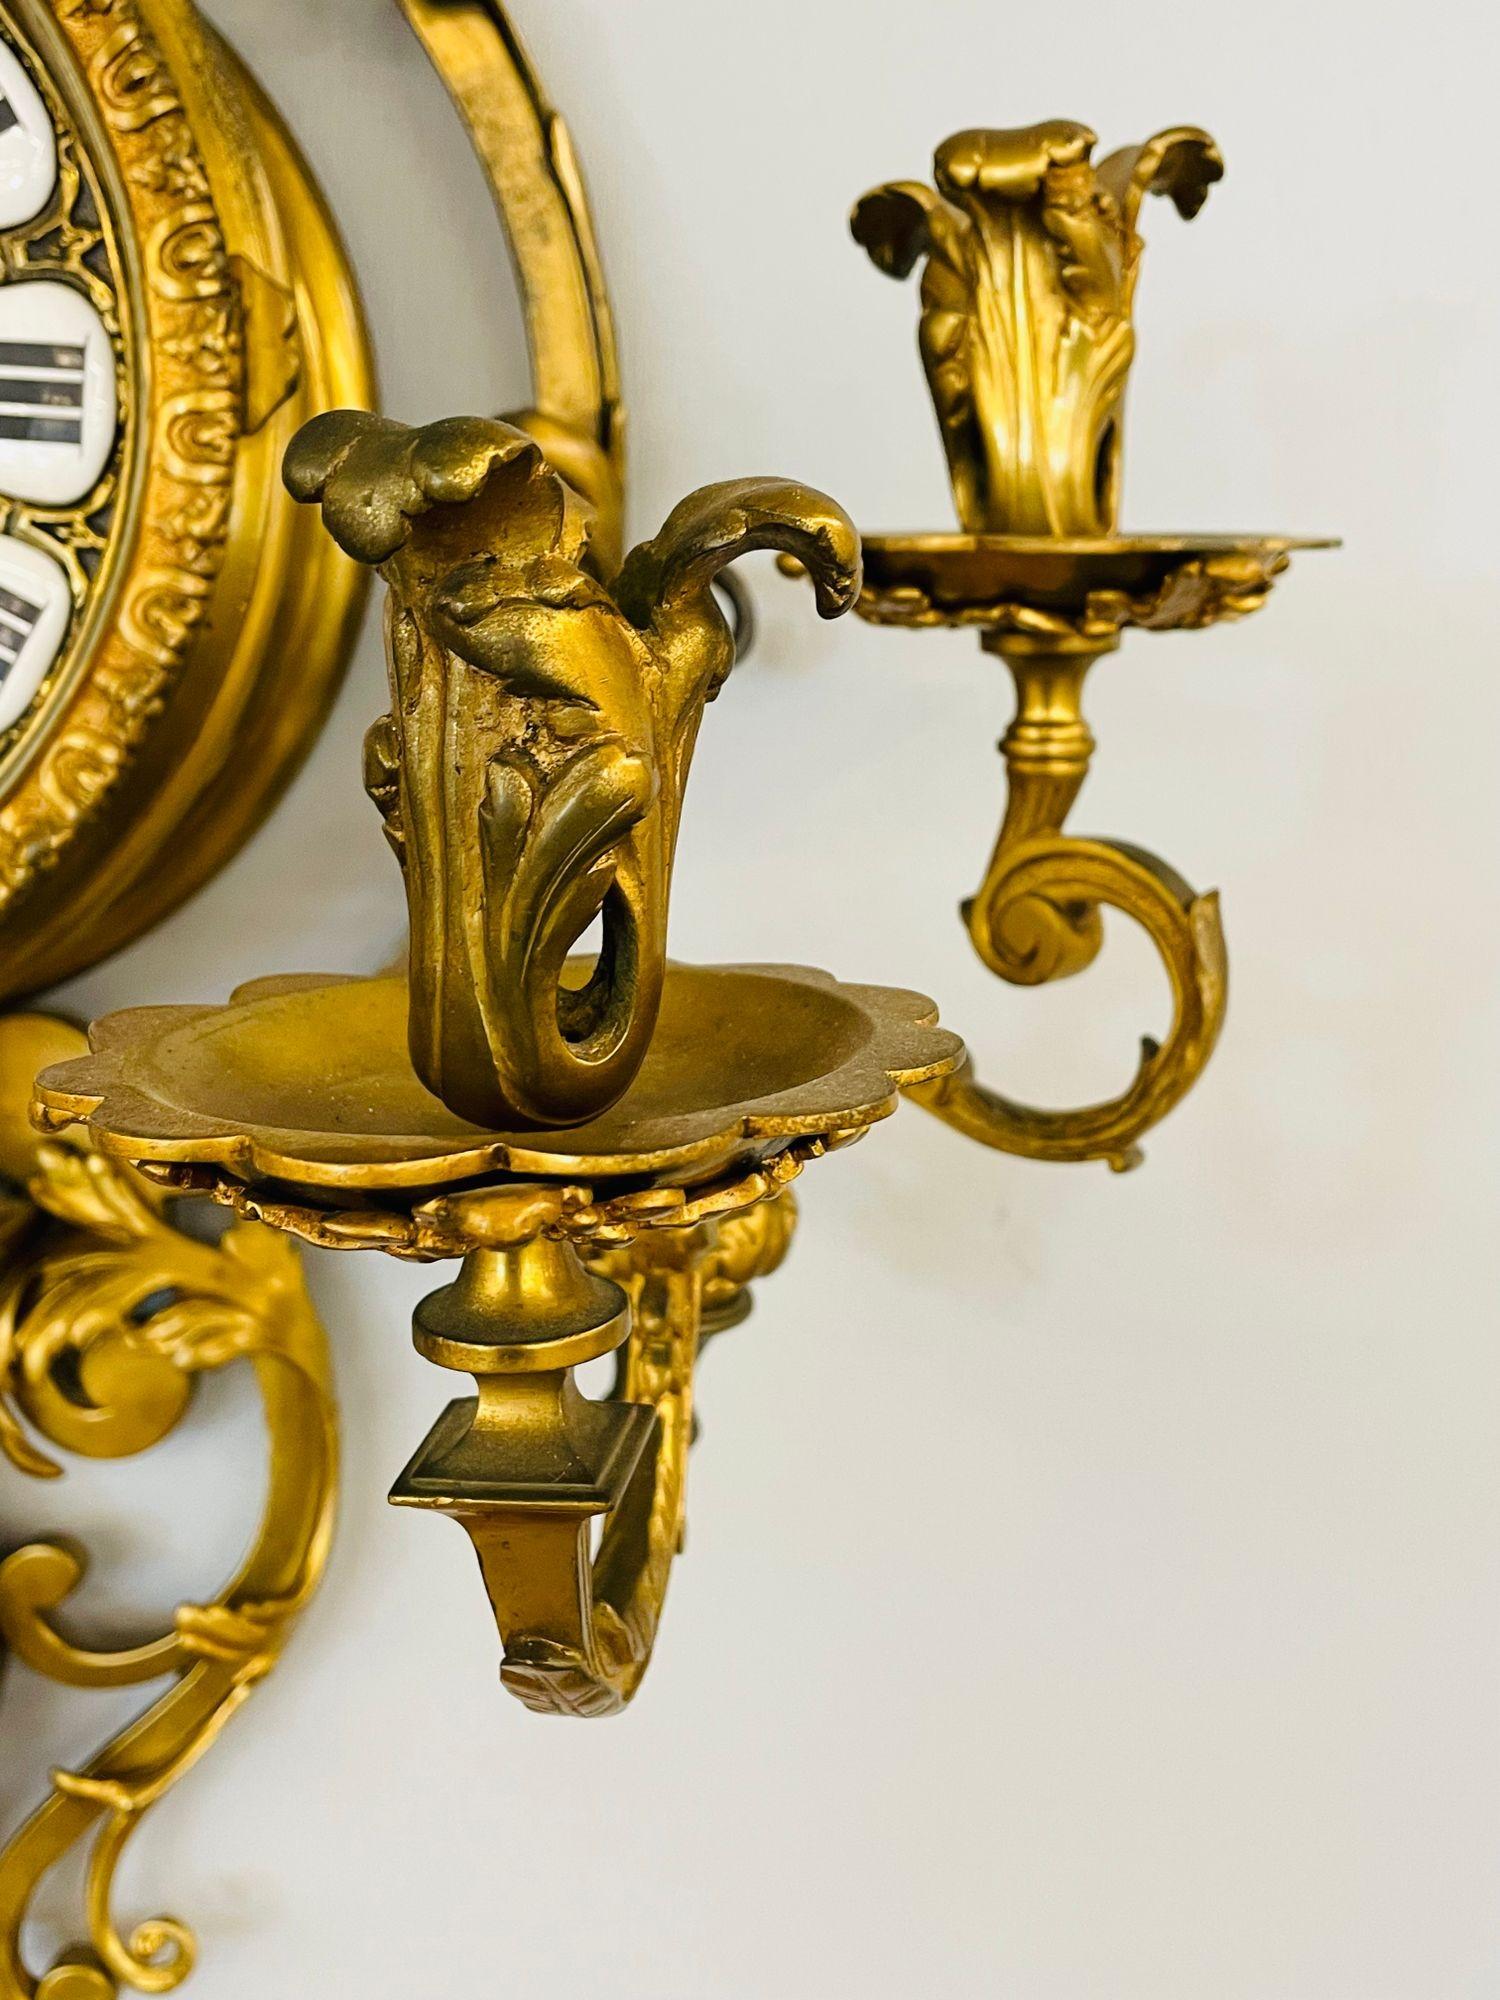 Early 20th Century Bronze Sconce Wall or Cartel Clock. Lerolle Freres, Paris, Rare, Unusual For Sale